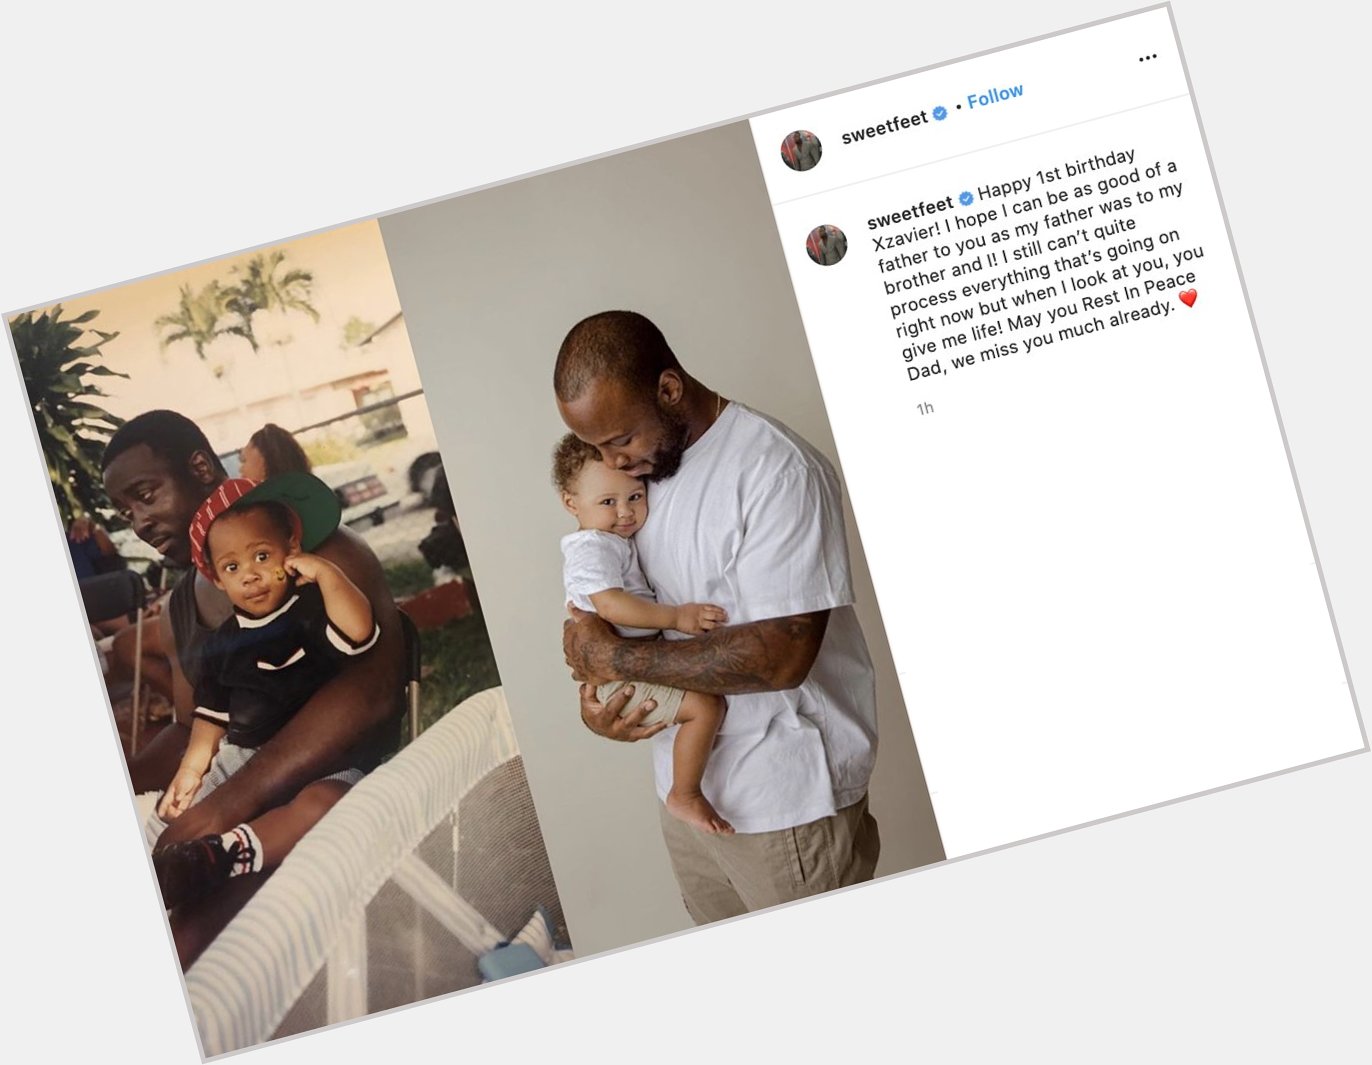 James White wished his son a happy first birthday while also paying tribute to his father  